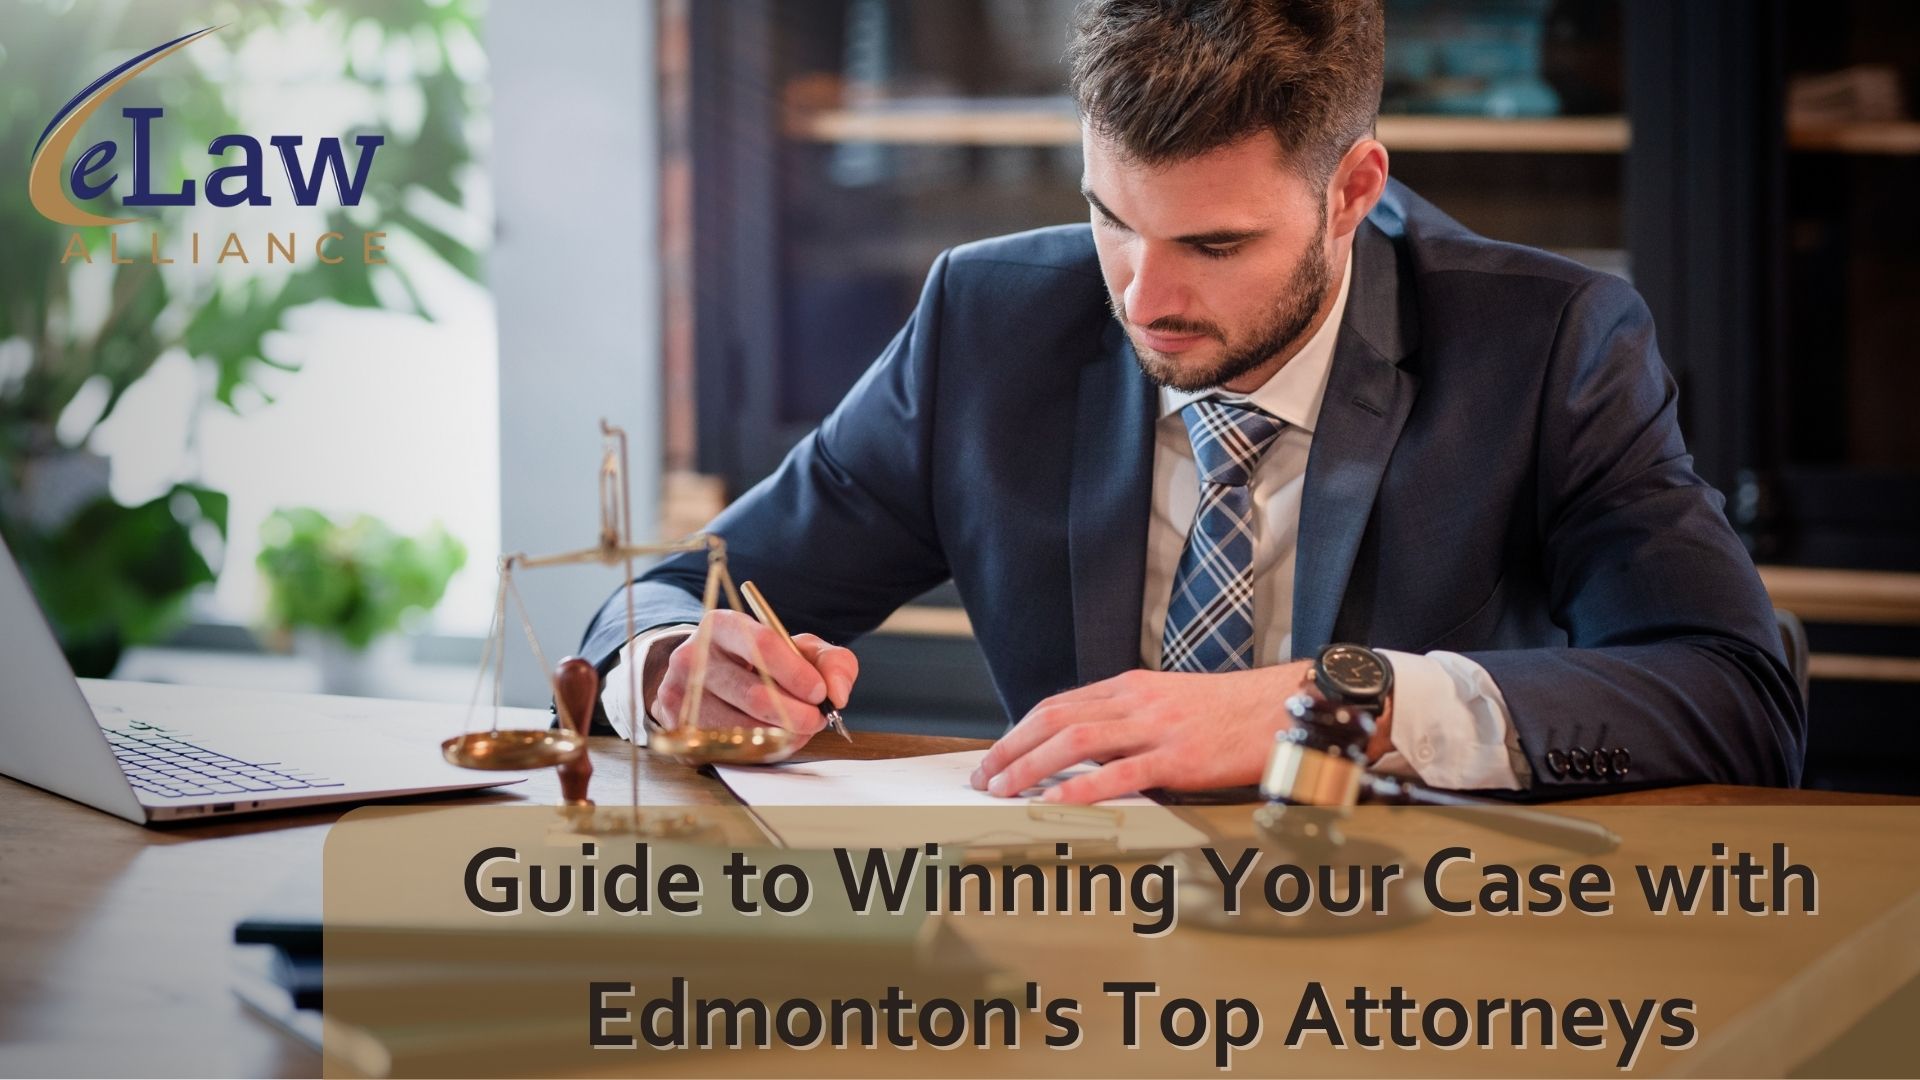 Guide to Winning Your Case with Edmonton's Top Attorneys